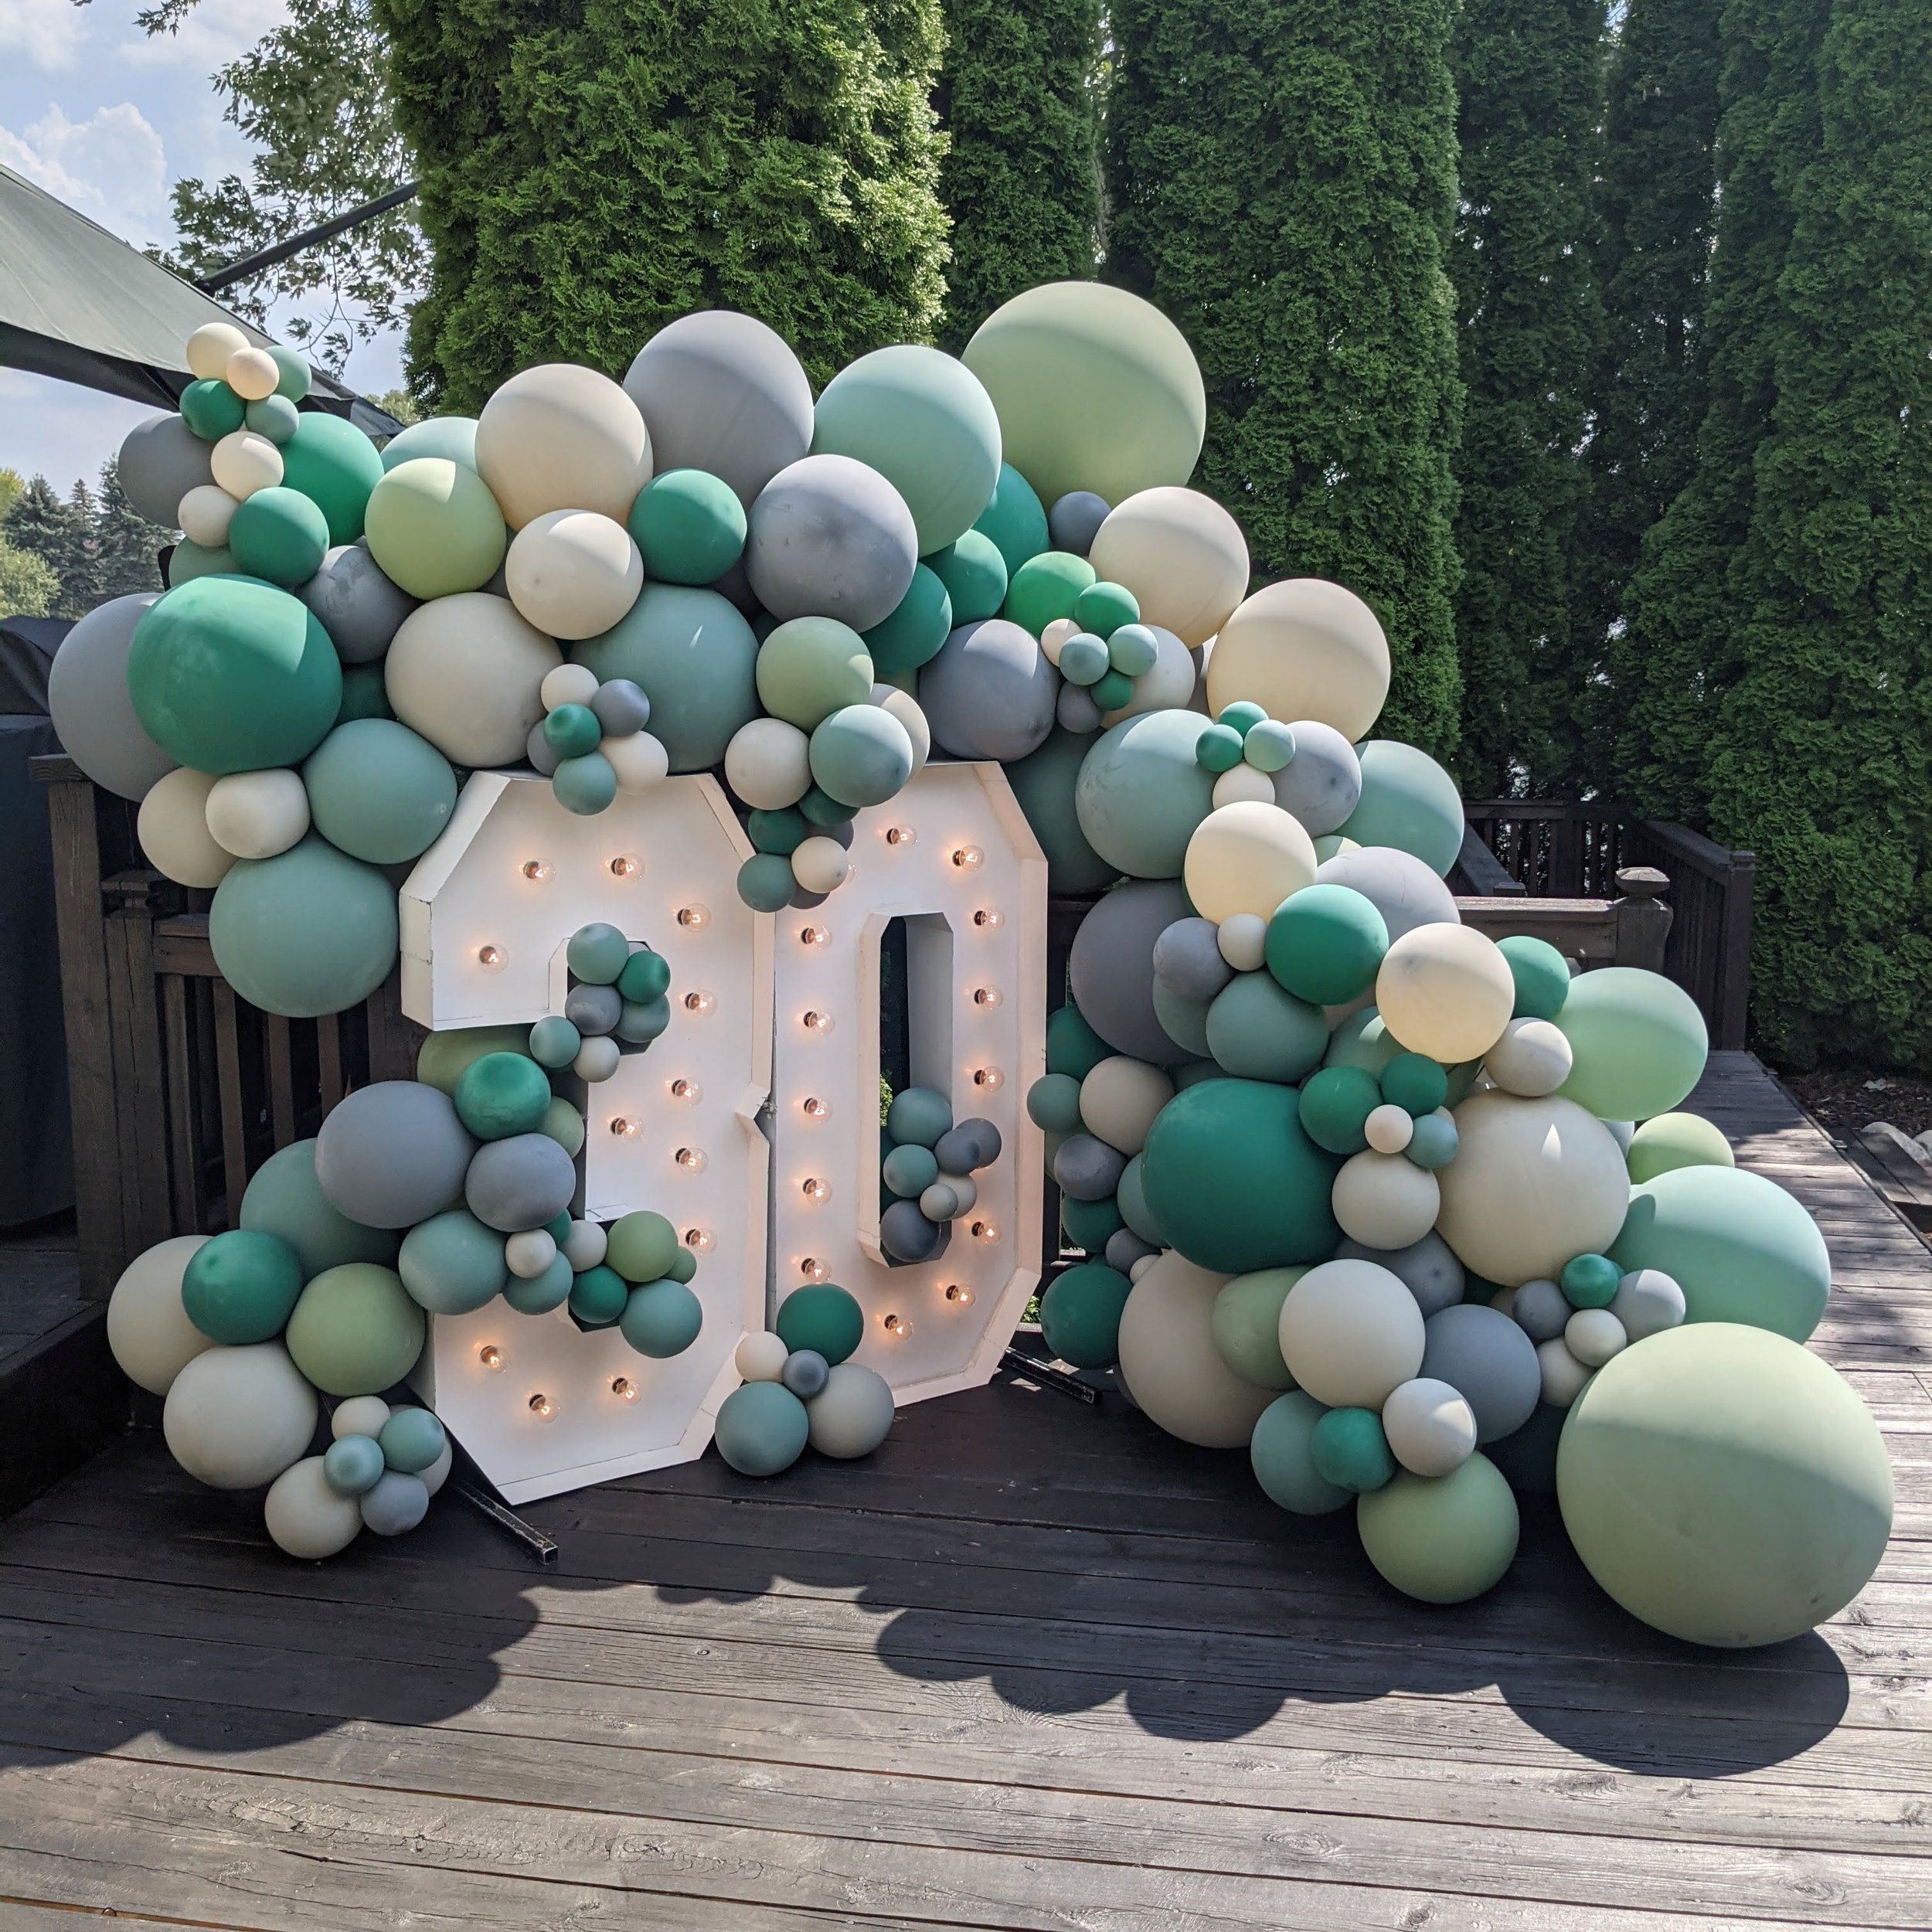 marquee numbers balloon arch commerce michigan.jpg